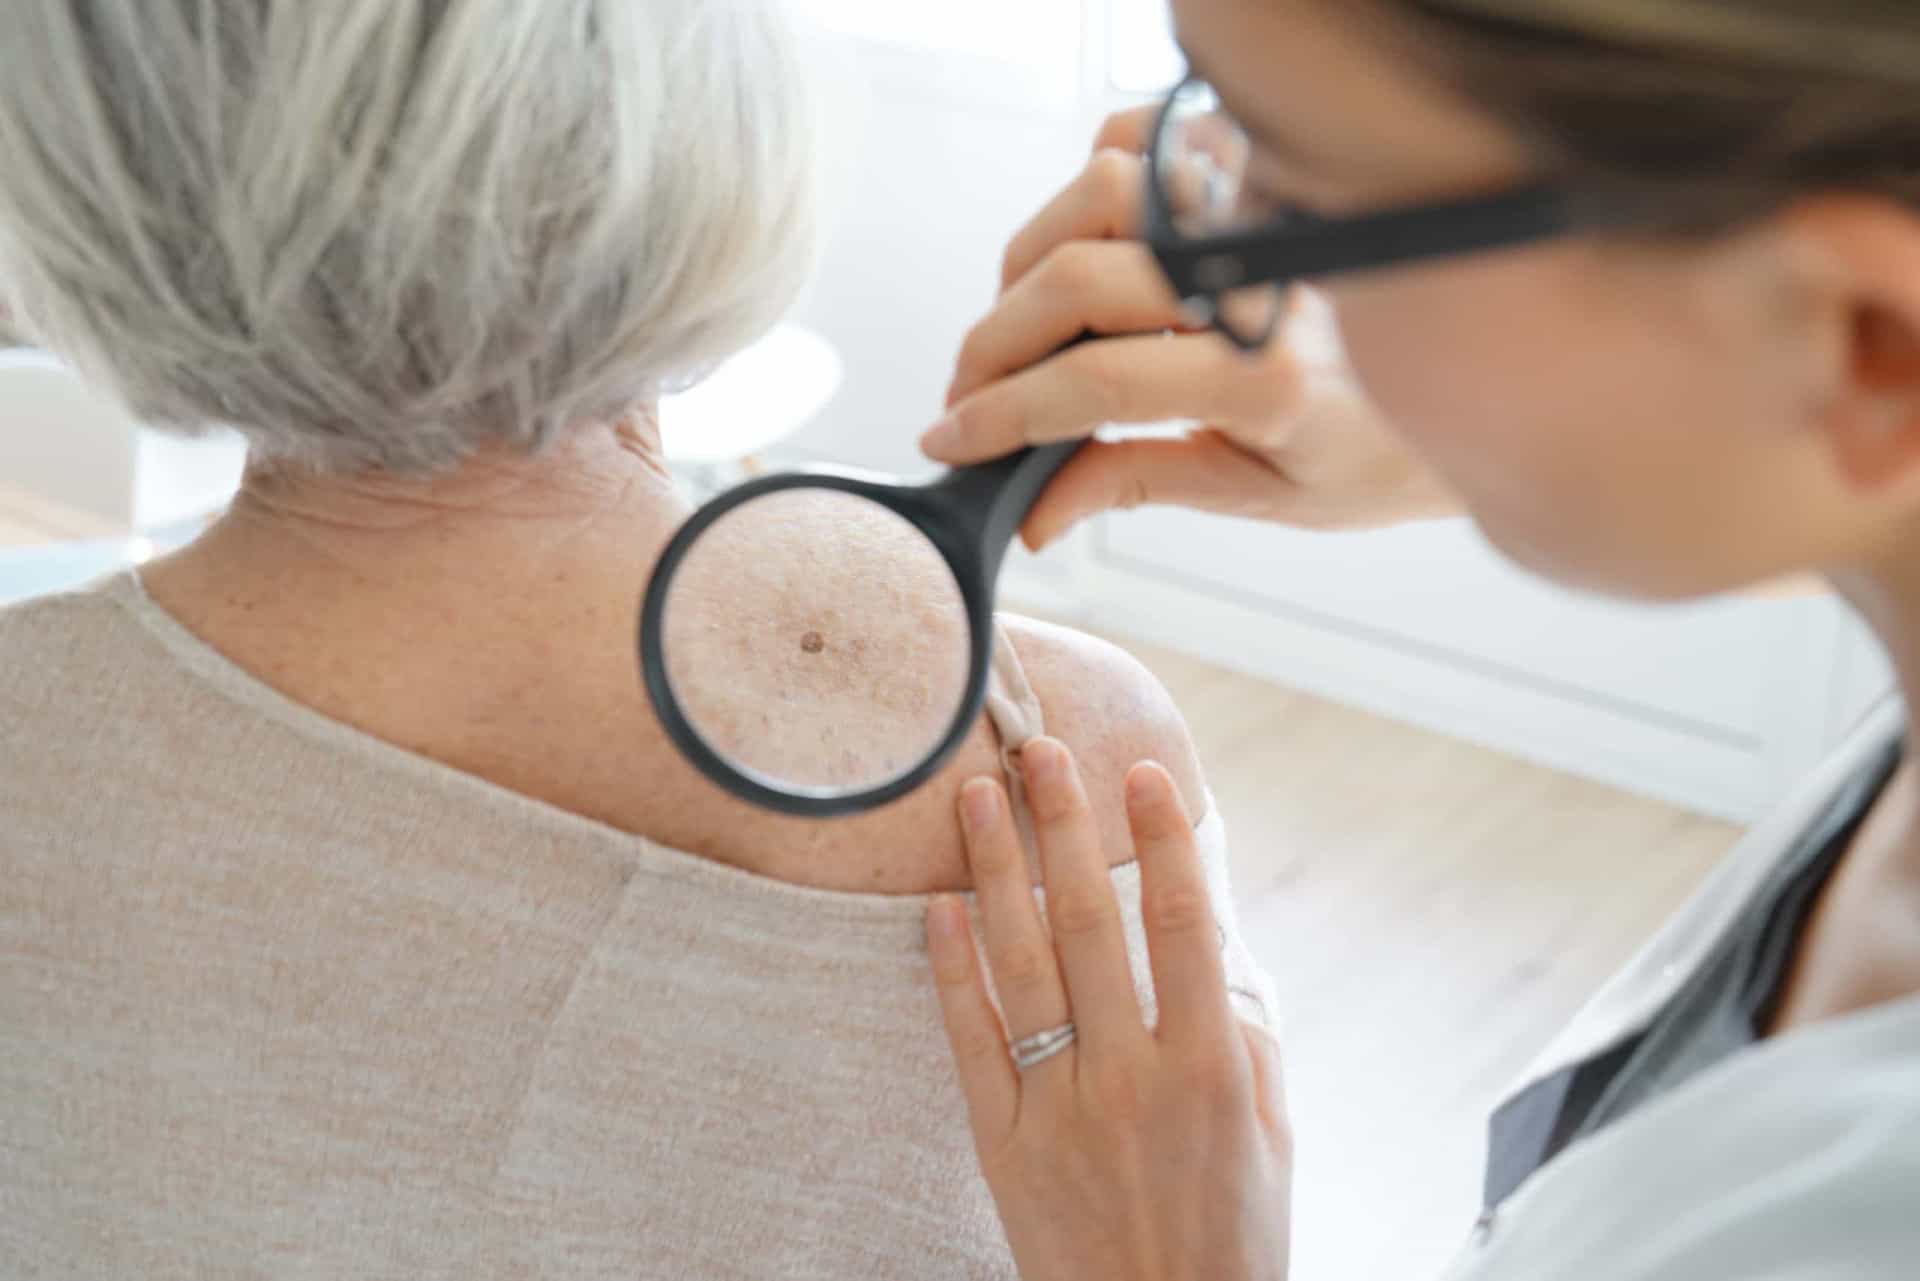 <p>It is important to tell your doctor if a new mole appears, or if you notice any changes on an existing mole.</p><p>You may also like:<a href="https://www.starsinsider.com/n/475071?utm_source=msn.com&utm_medium=display&utm_campaign=referral_description&utm_content=516289en-us"> Hollywood scandals that history forgot</a></p>